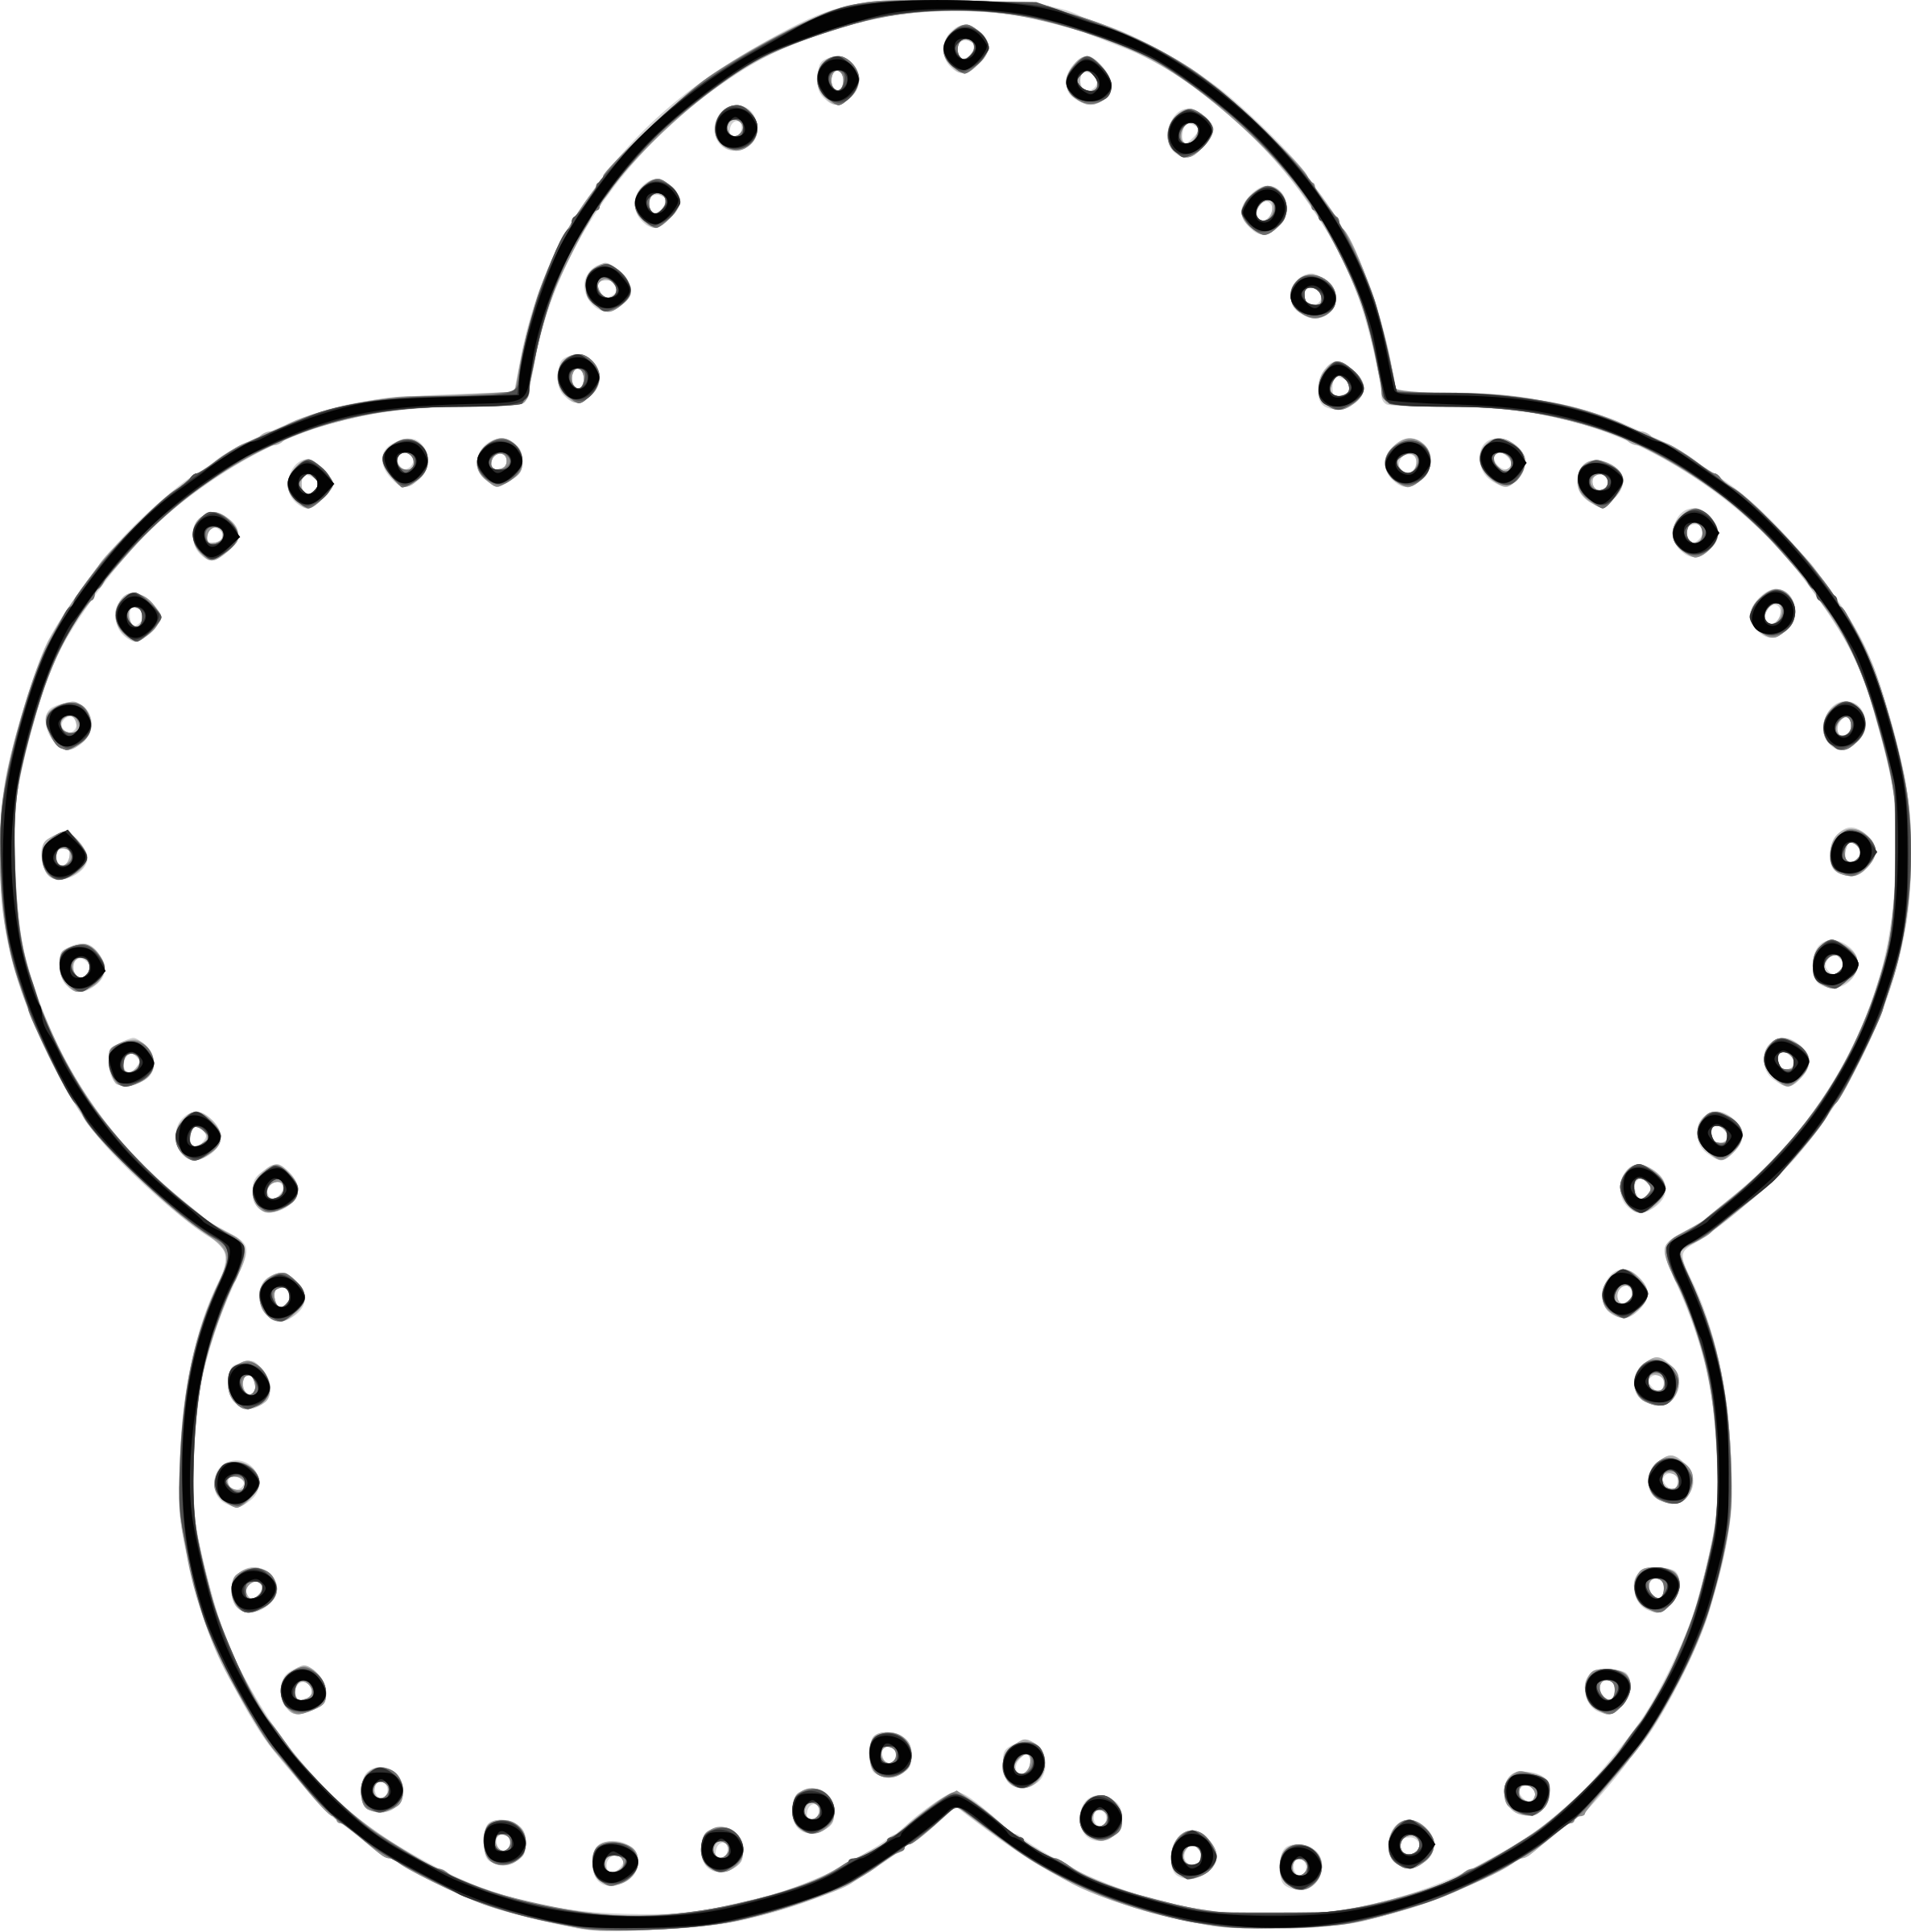 circle clipart black and white - photo #48